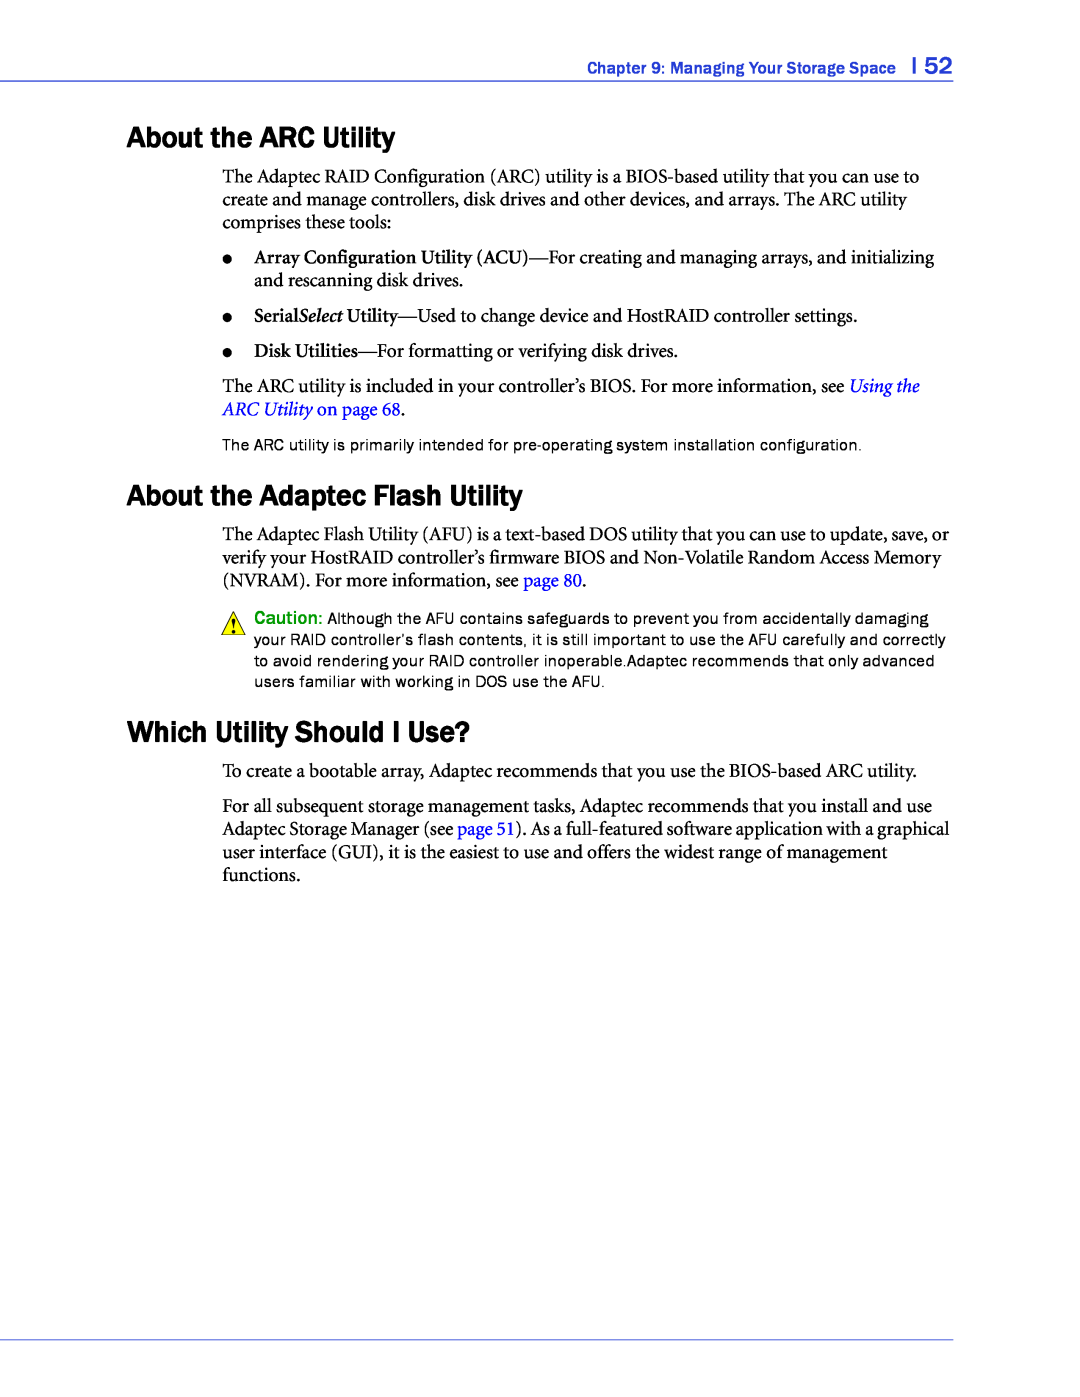 Adaptec 48300, 58300, 44300, 1220SA manual About the ARC Utility, About the Adaptec Flash Utility, Which Utility Should I Use? 